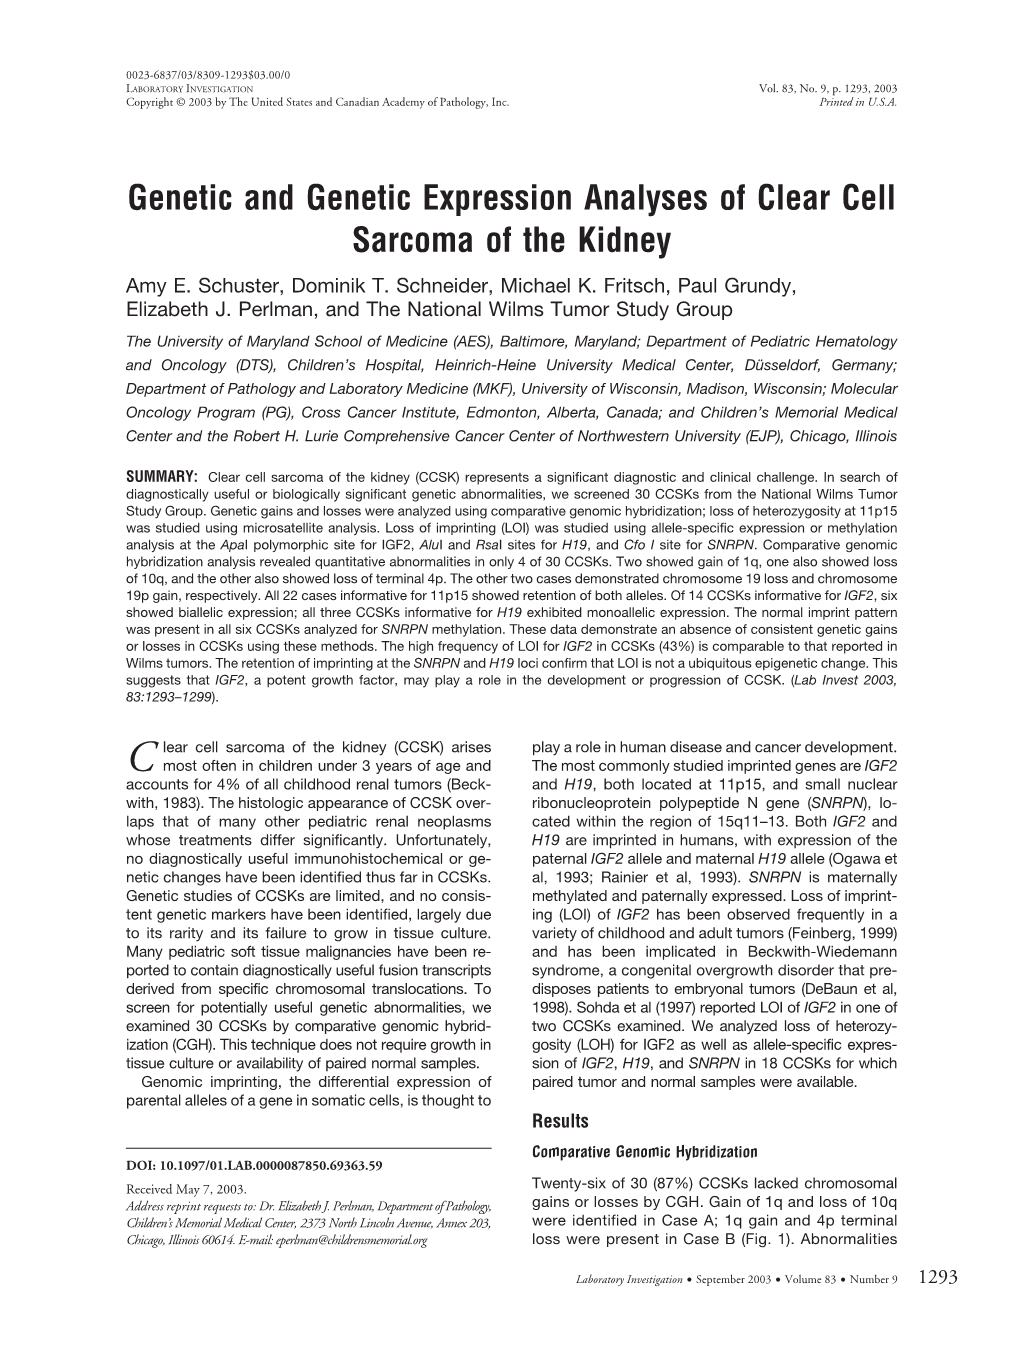 Genetic and Genetic Expression Analyses of Clear Cell Sarcoma of the Kidney Amy E